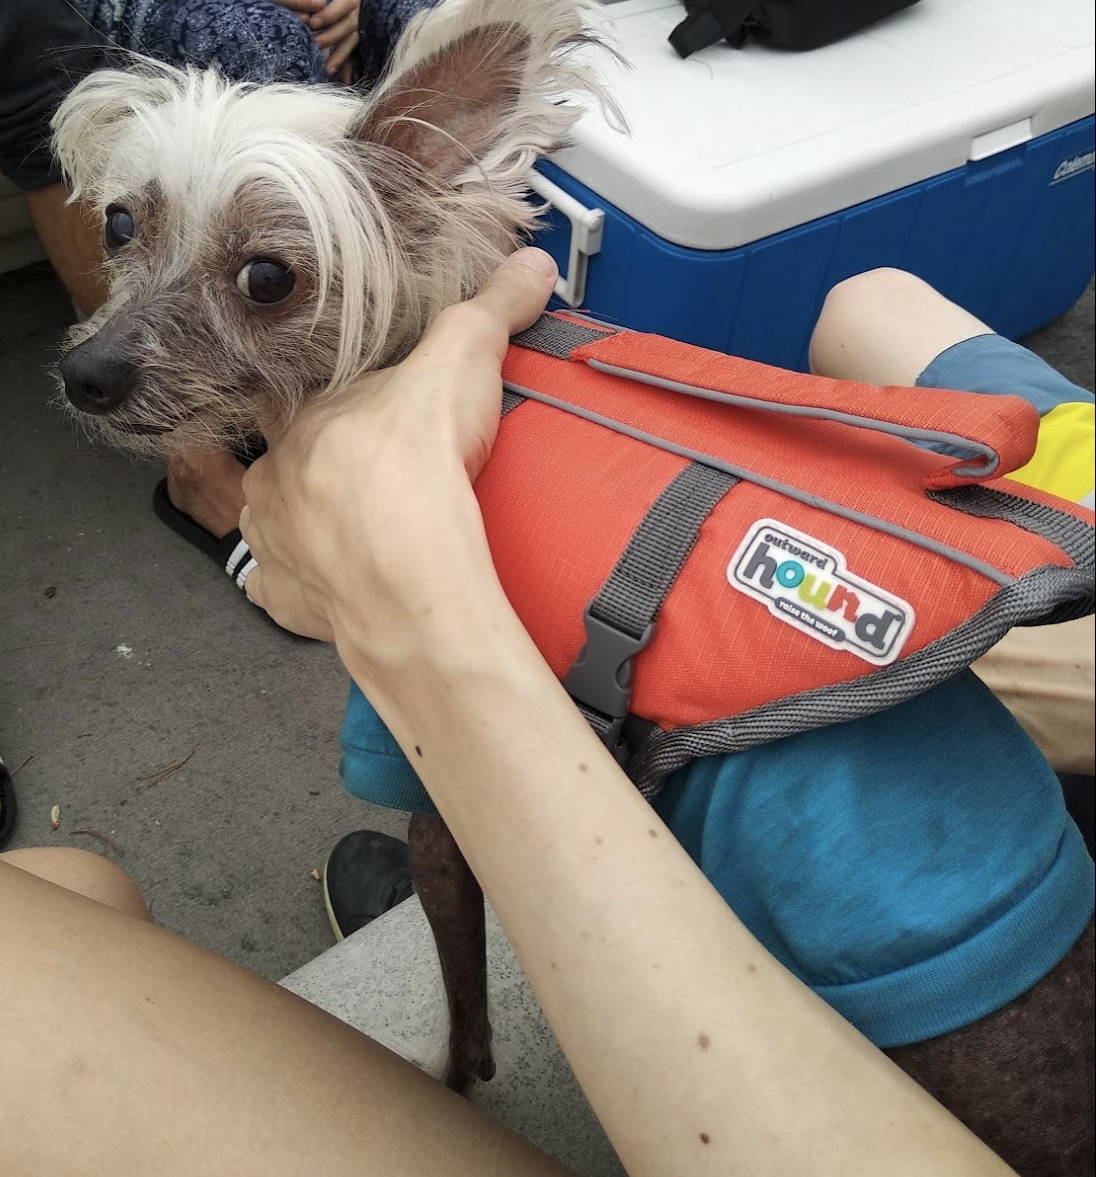 A dog looking at the camera while wearing the life jacket in a boat